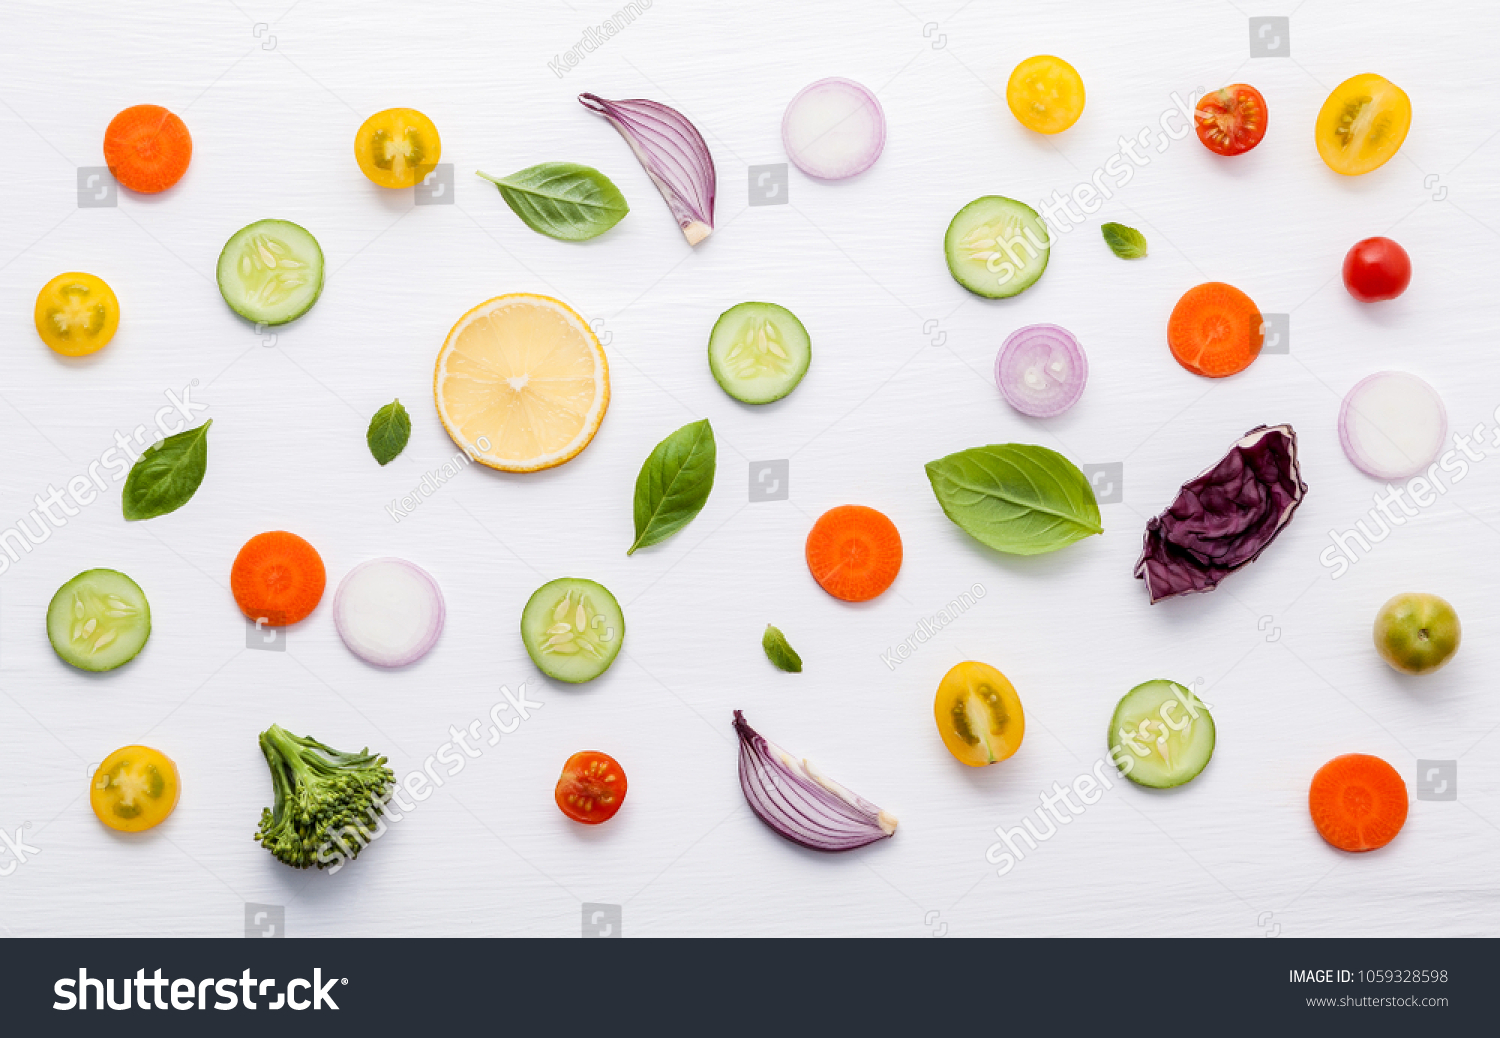 Food pattern with raw ingredients of salad. Various vegetables lettuce leaves, cucumbers, tomatoes, carrots, broccoli, onion and lemon flat lay on white background. #1059328598